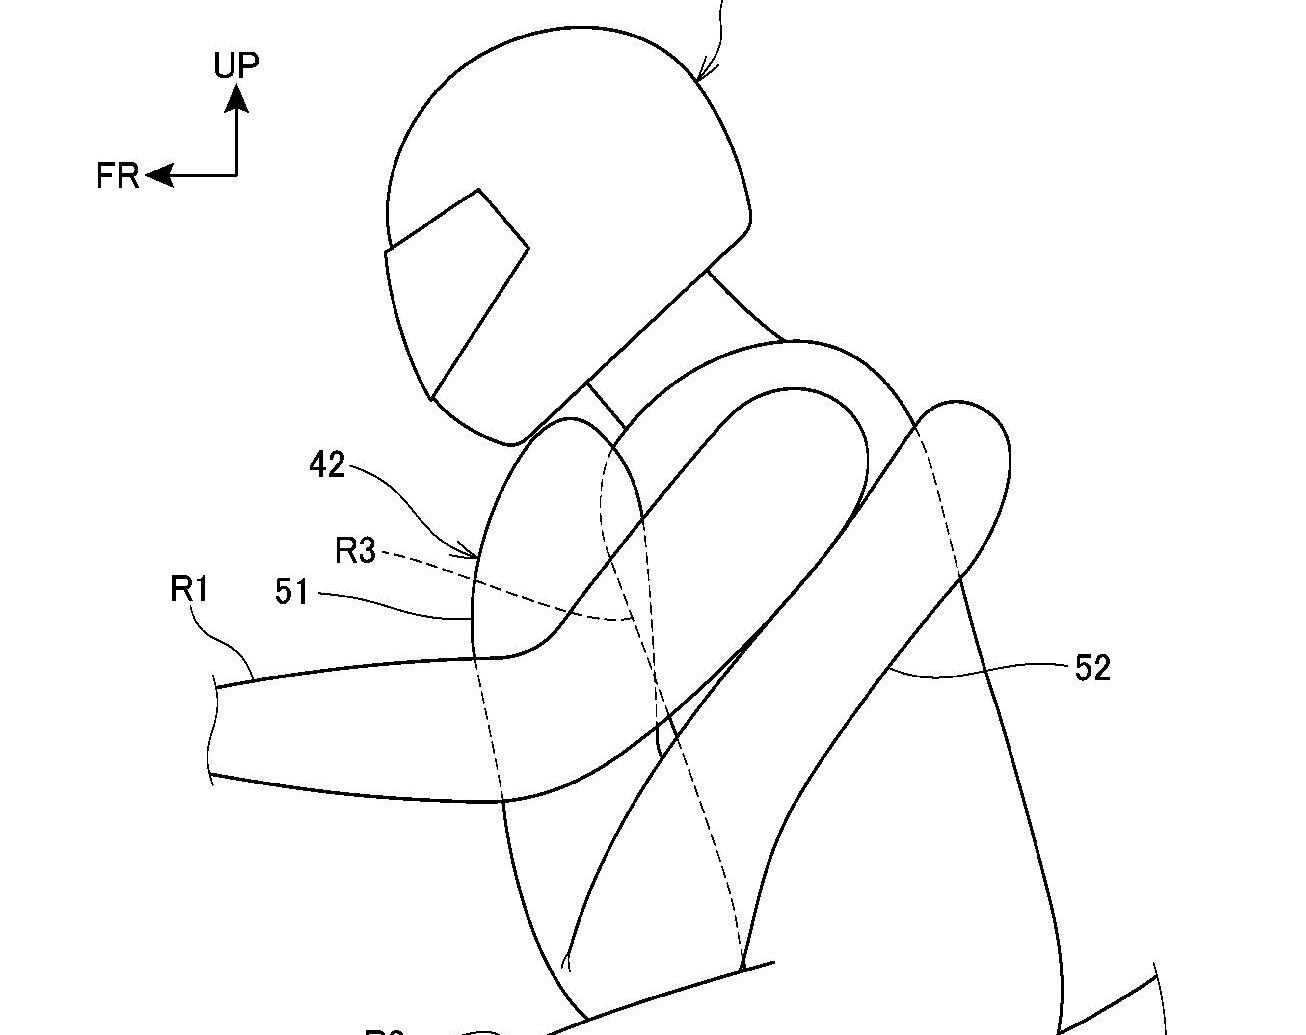 The proposed airbag would wrap around the rider’s torso.